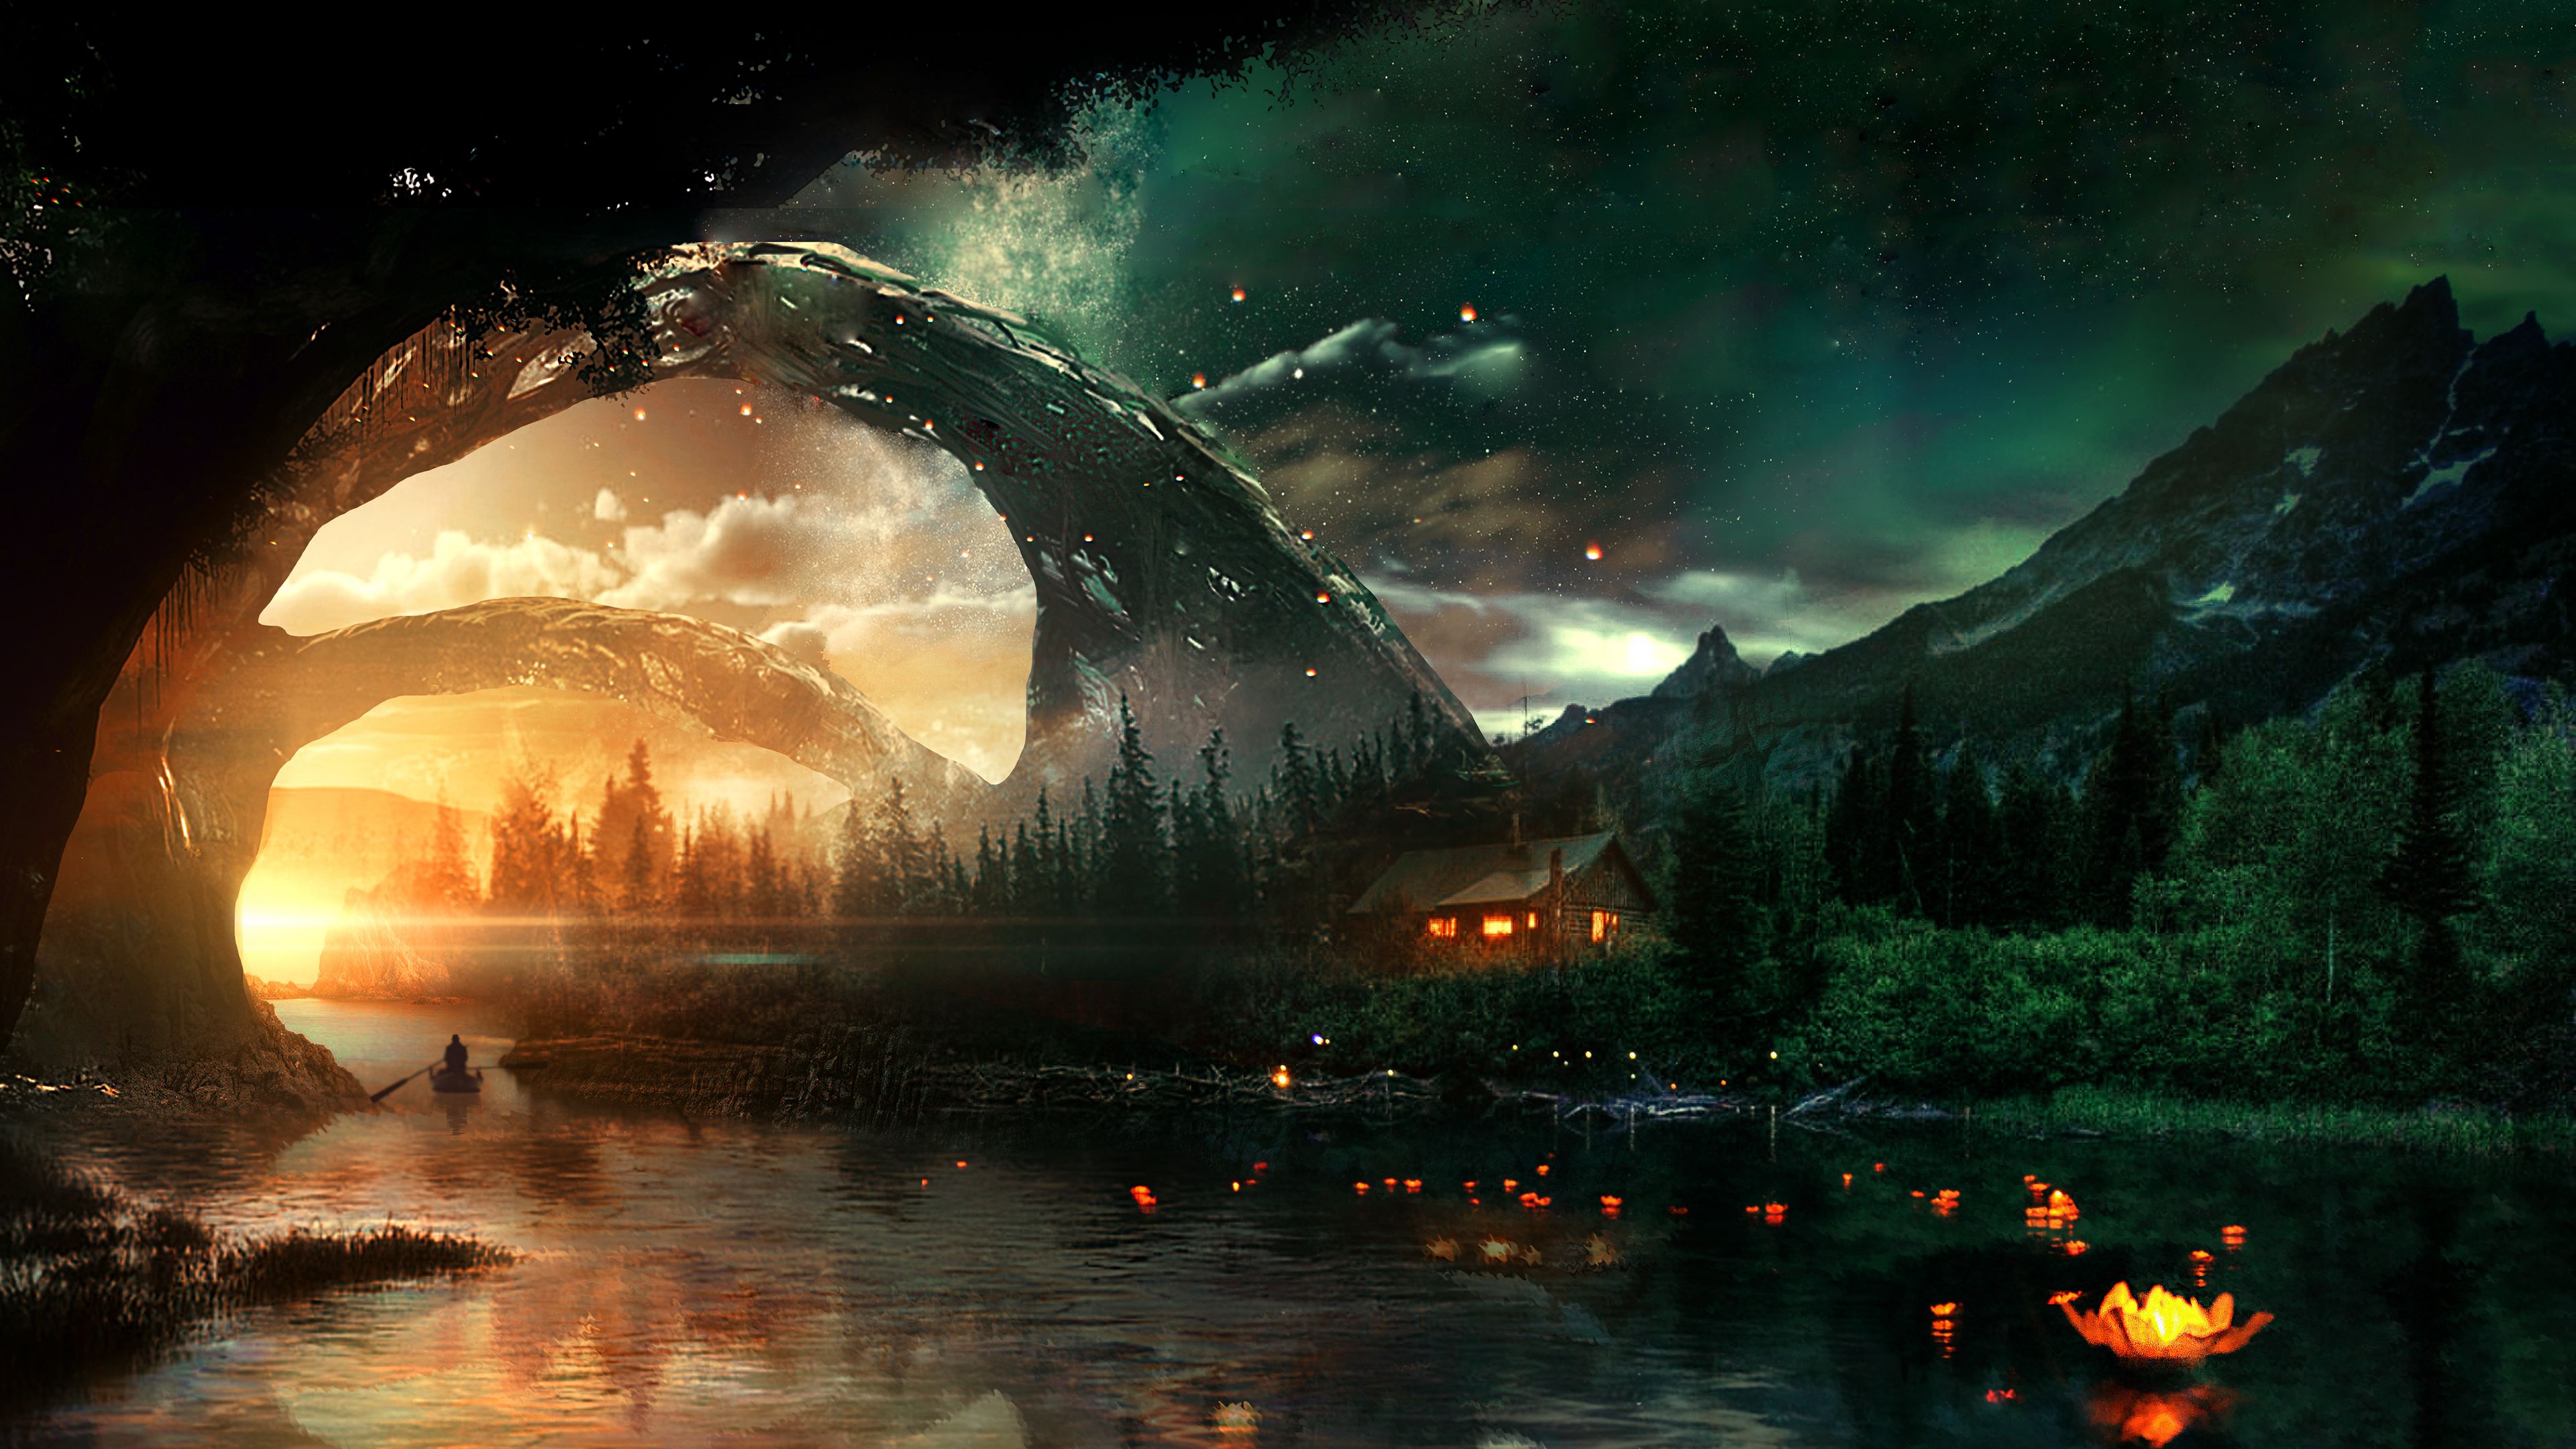 Wallpaper River, House, Art, Night, Starry Sky, Fantastic - Colbreakz & Loxive Always With You , HD Wallpaper & Backgrounds